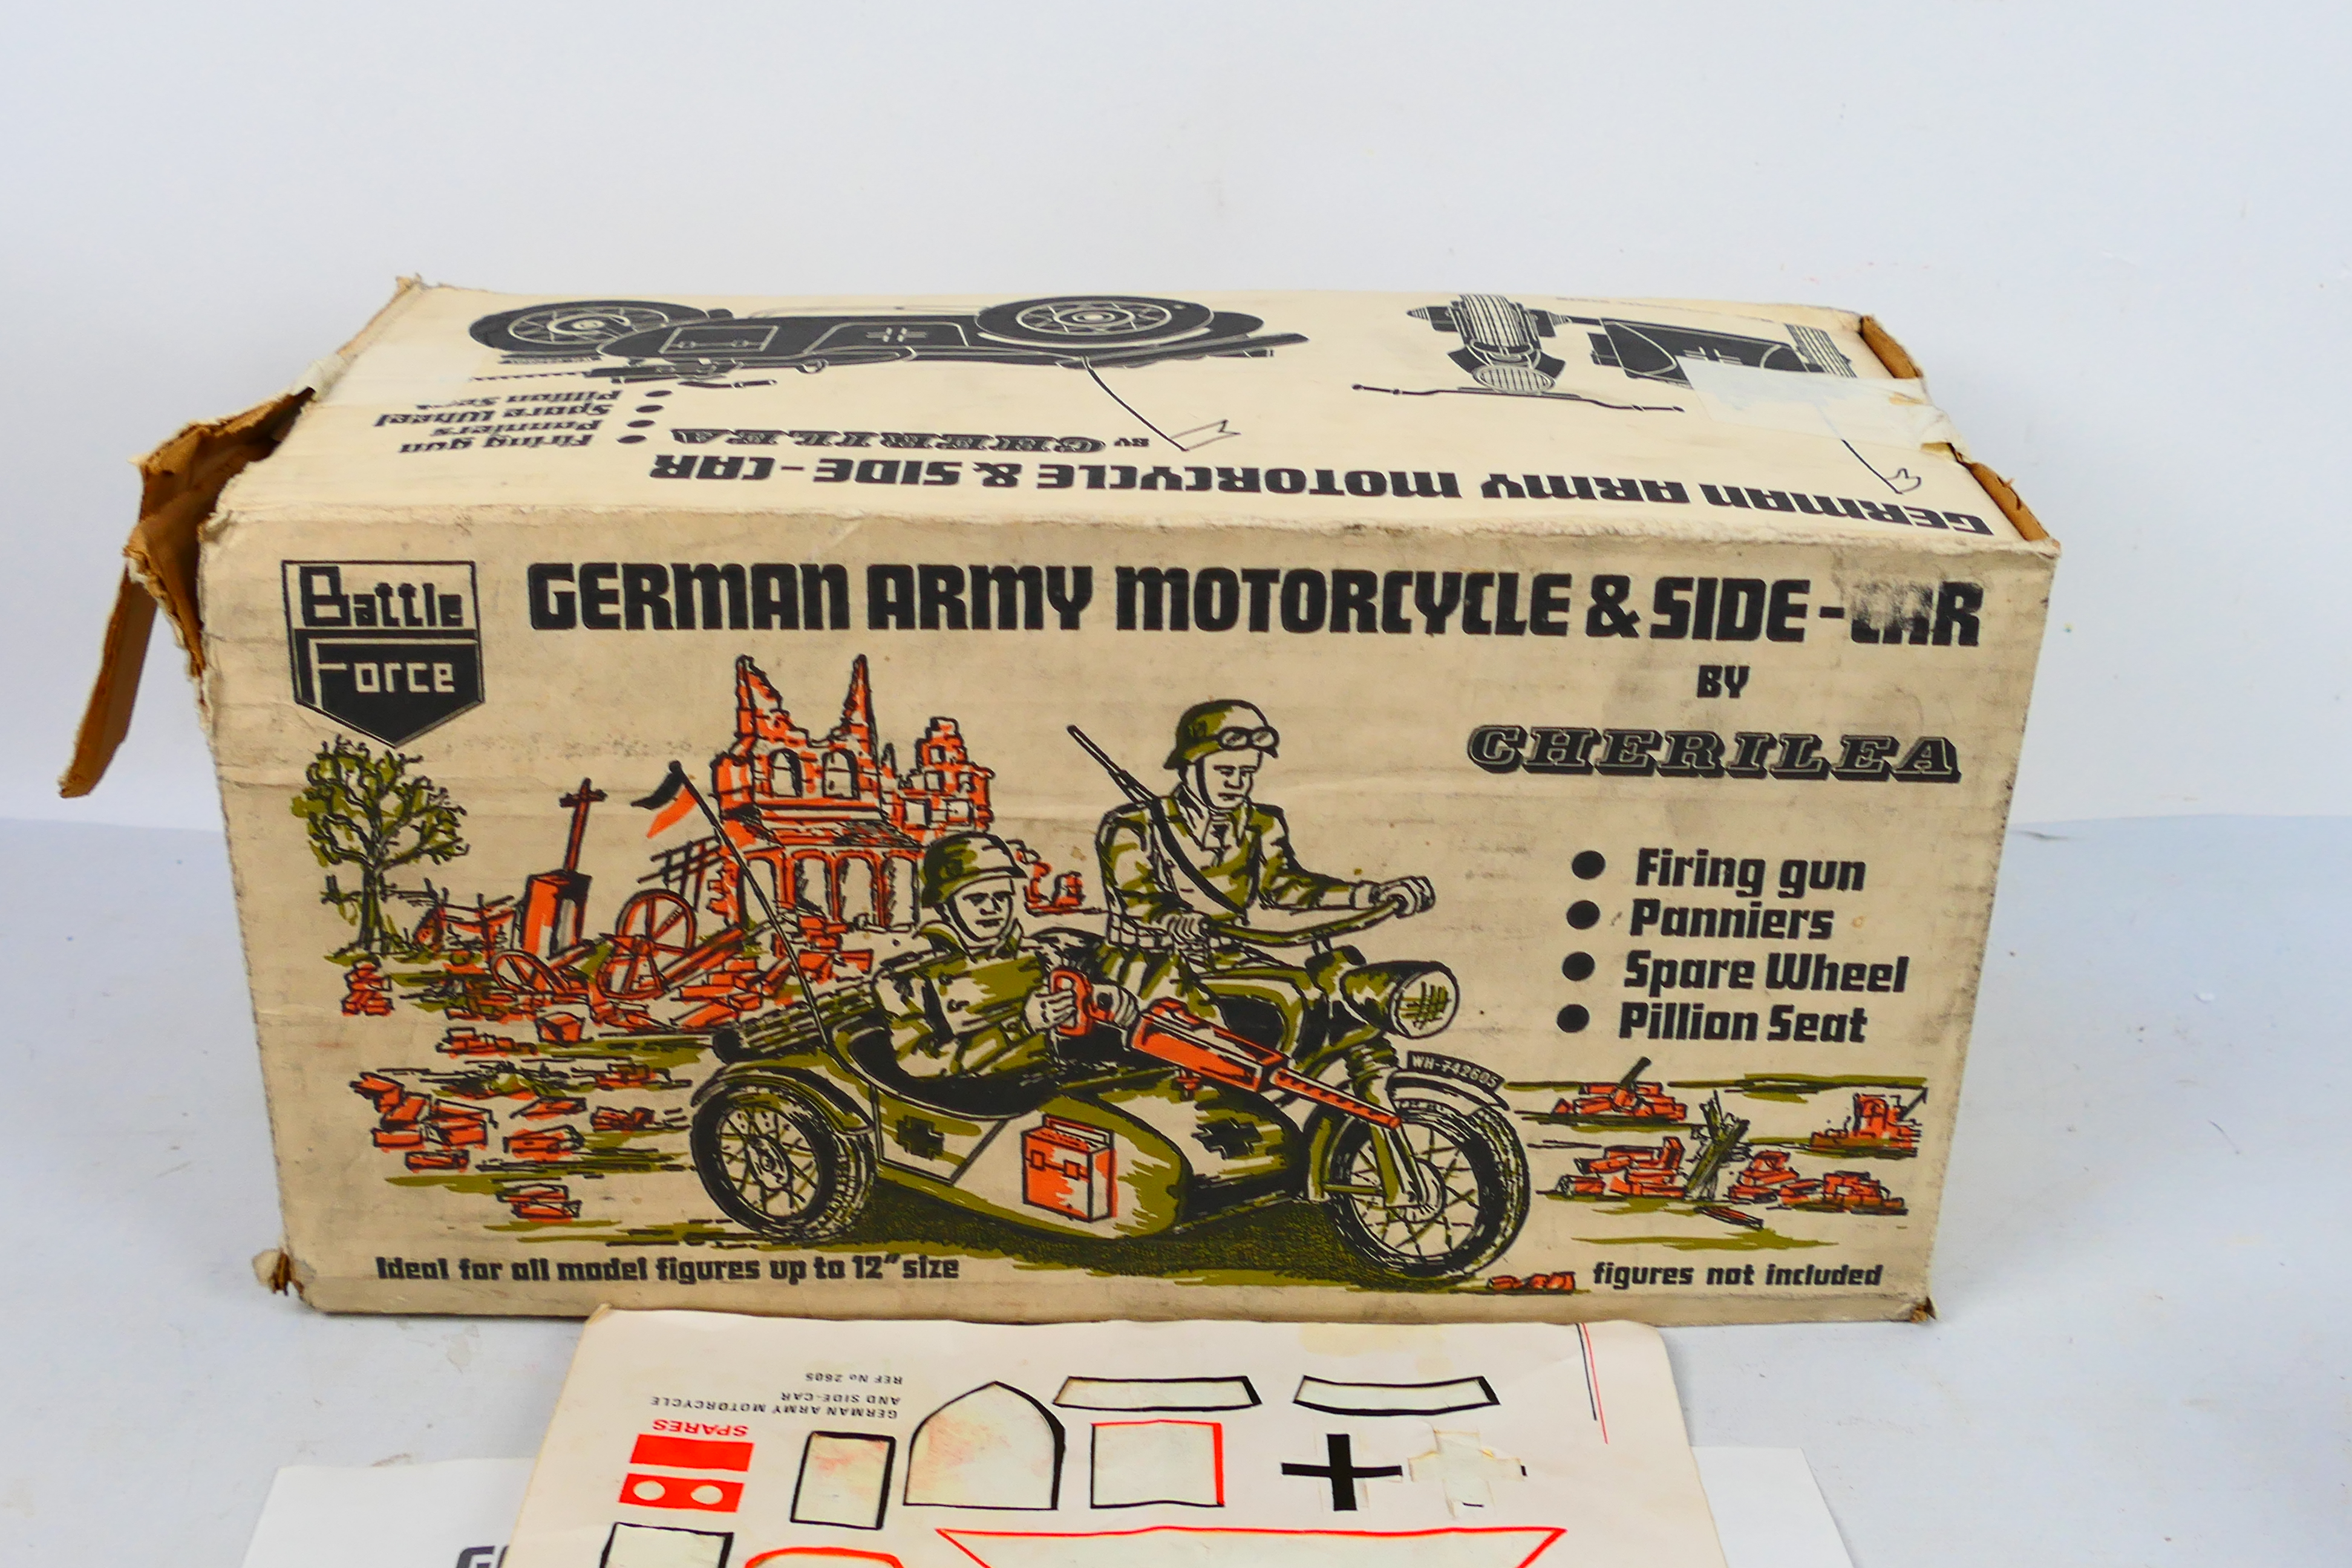 Cherilea Toys - Battle Force. A boxed Cherilea Toys made German Army Motorcycle & Sidecar #2605. - Image 5 of 8